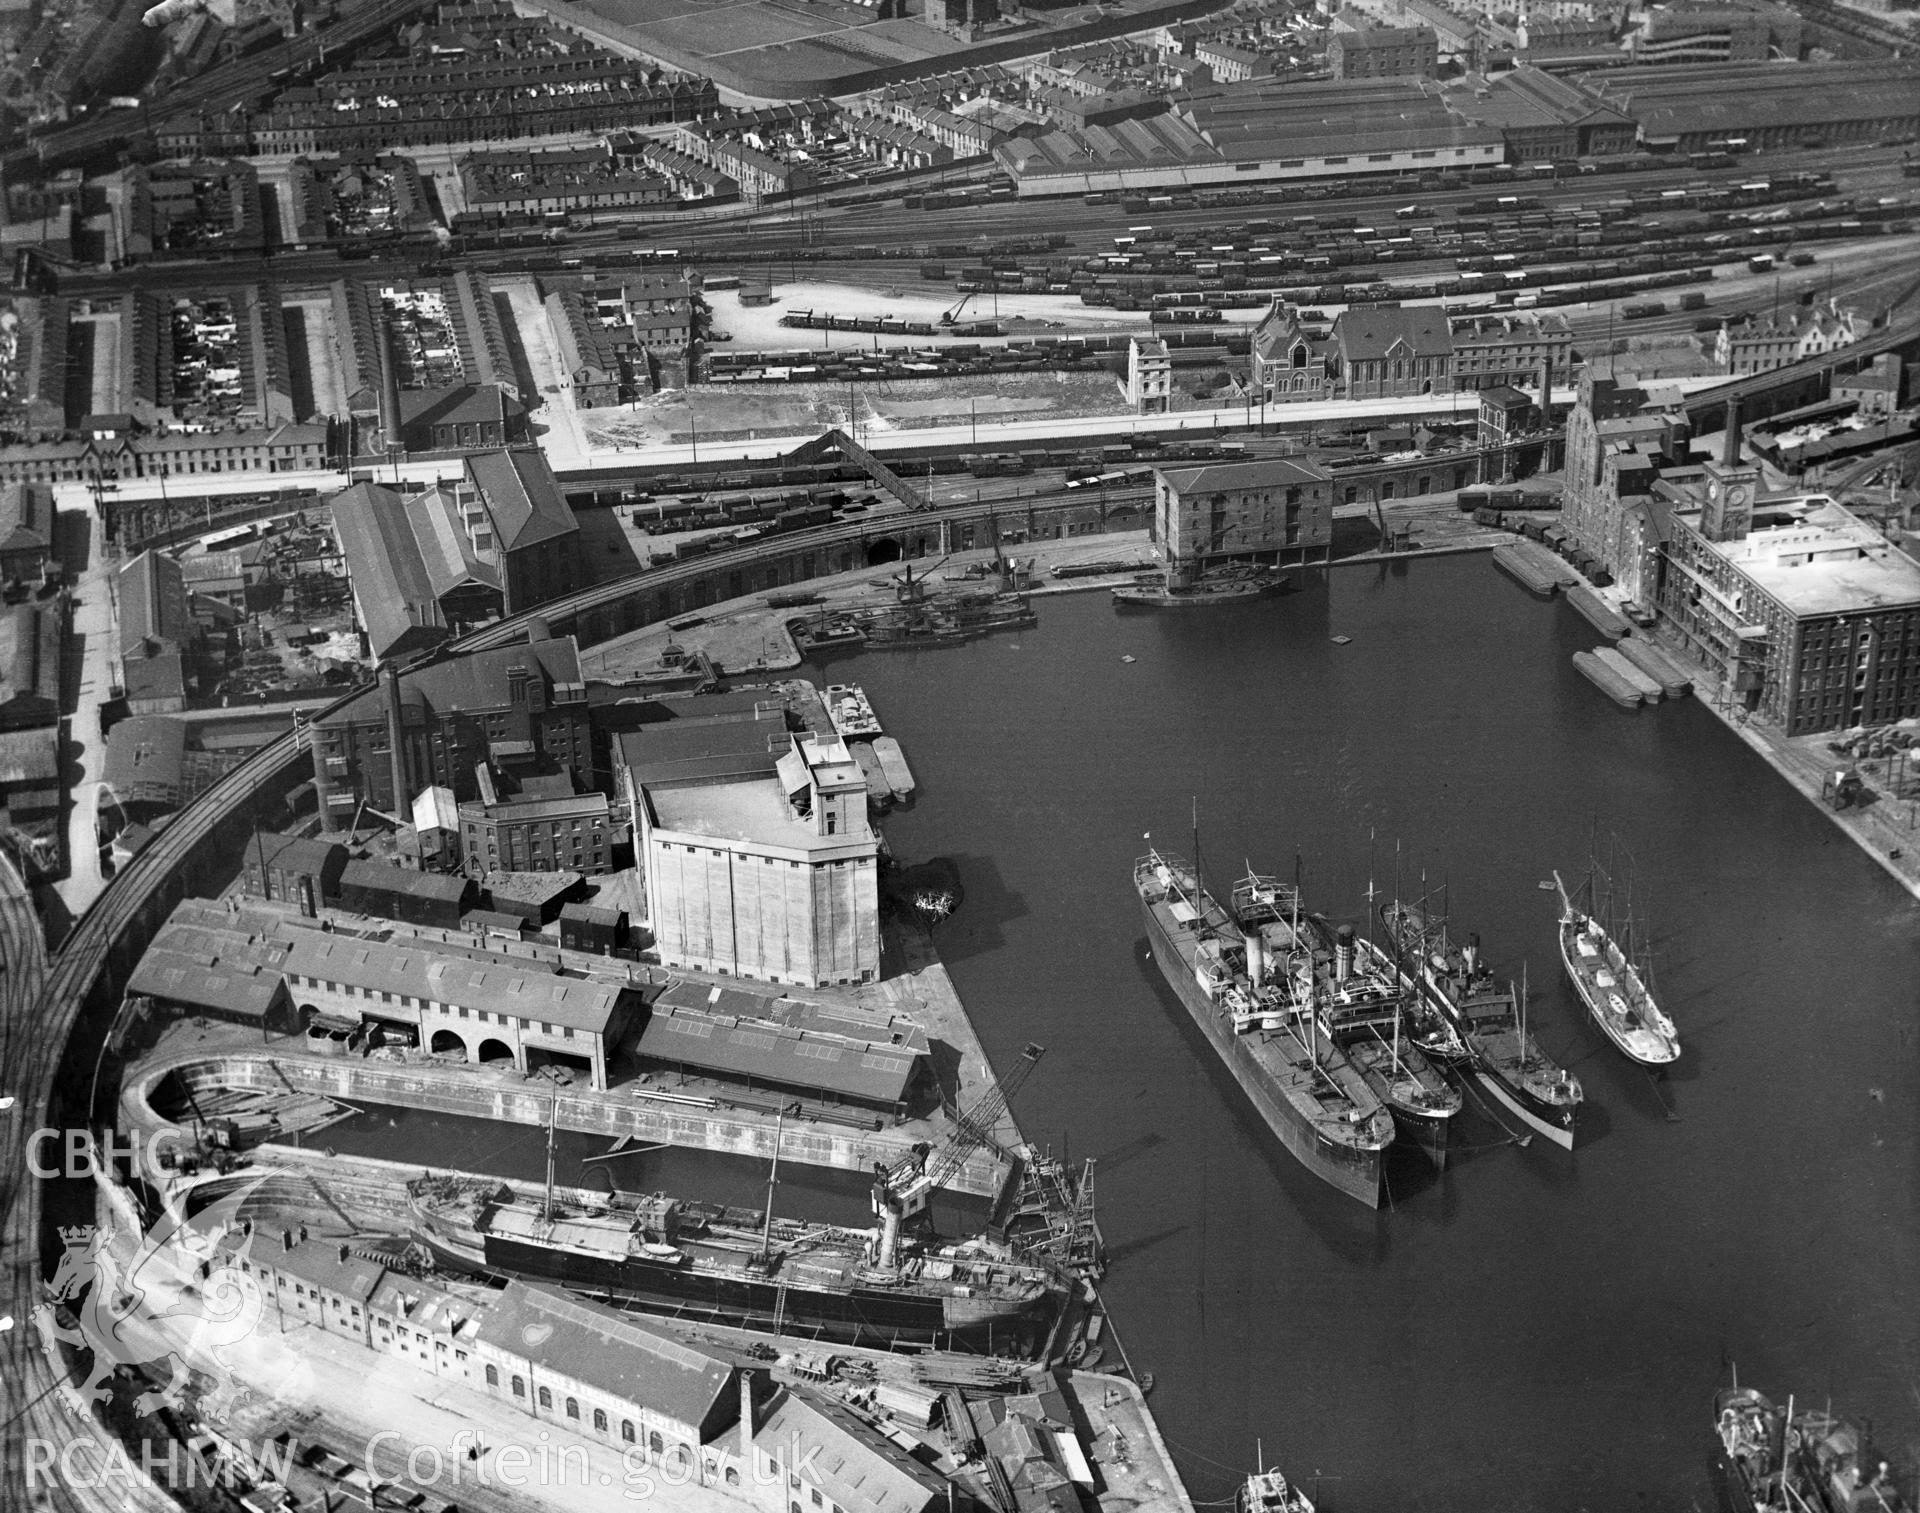 Black and white oblique aerial photograph showing Cardiff Docks, from Aerofilms album Cardiff (W22), taken by Aerofilms Ltd and dated 1921.